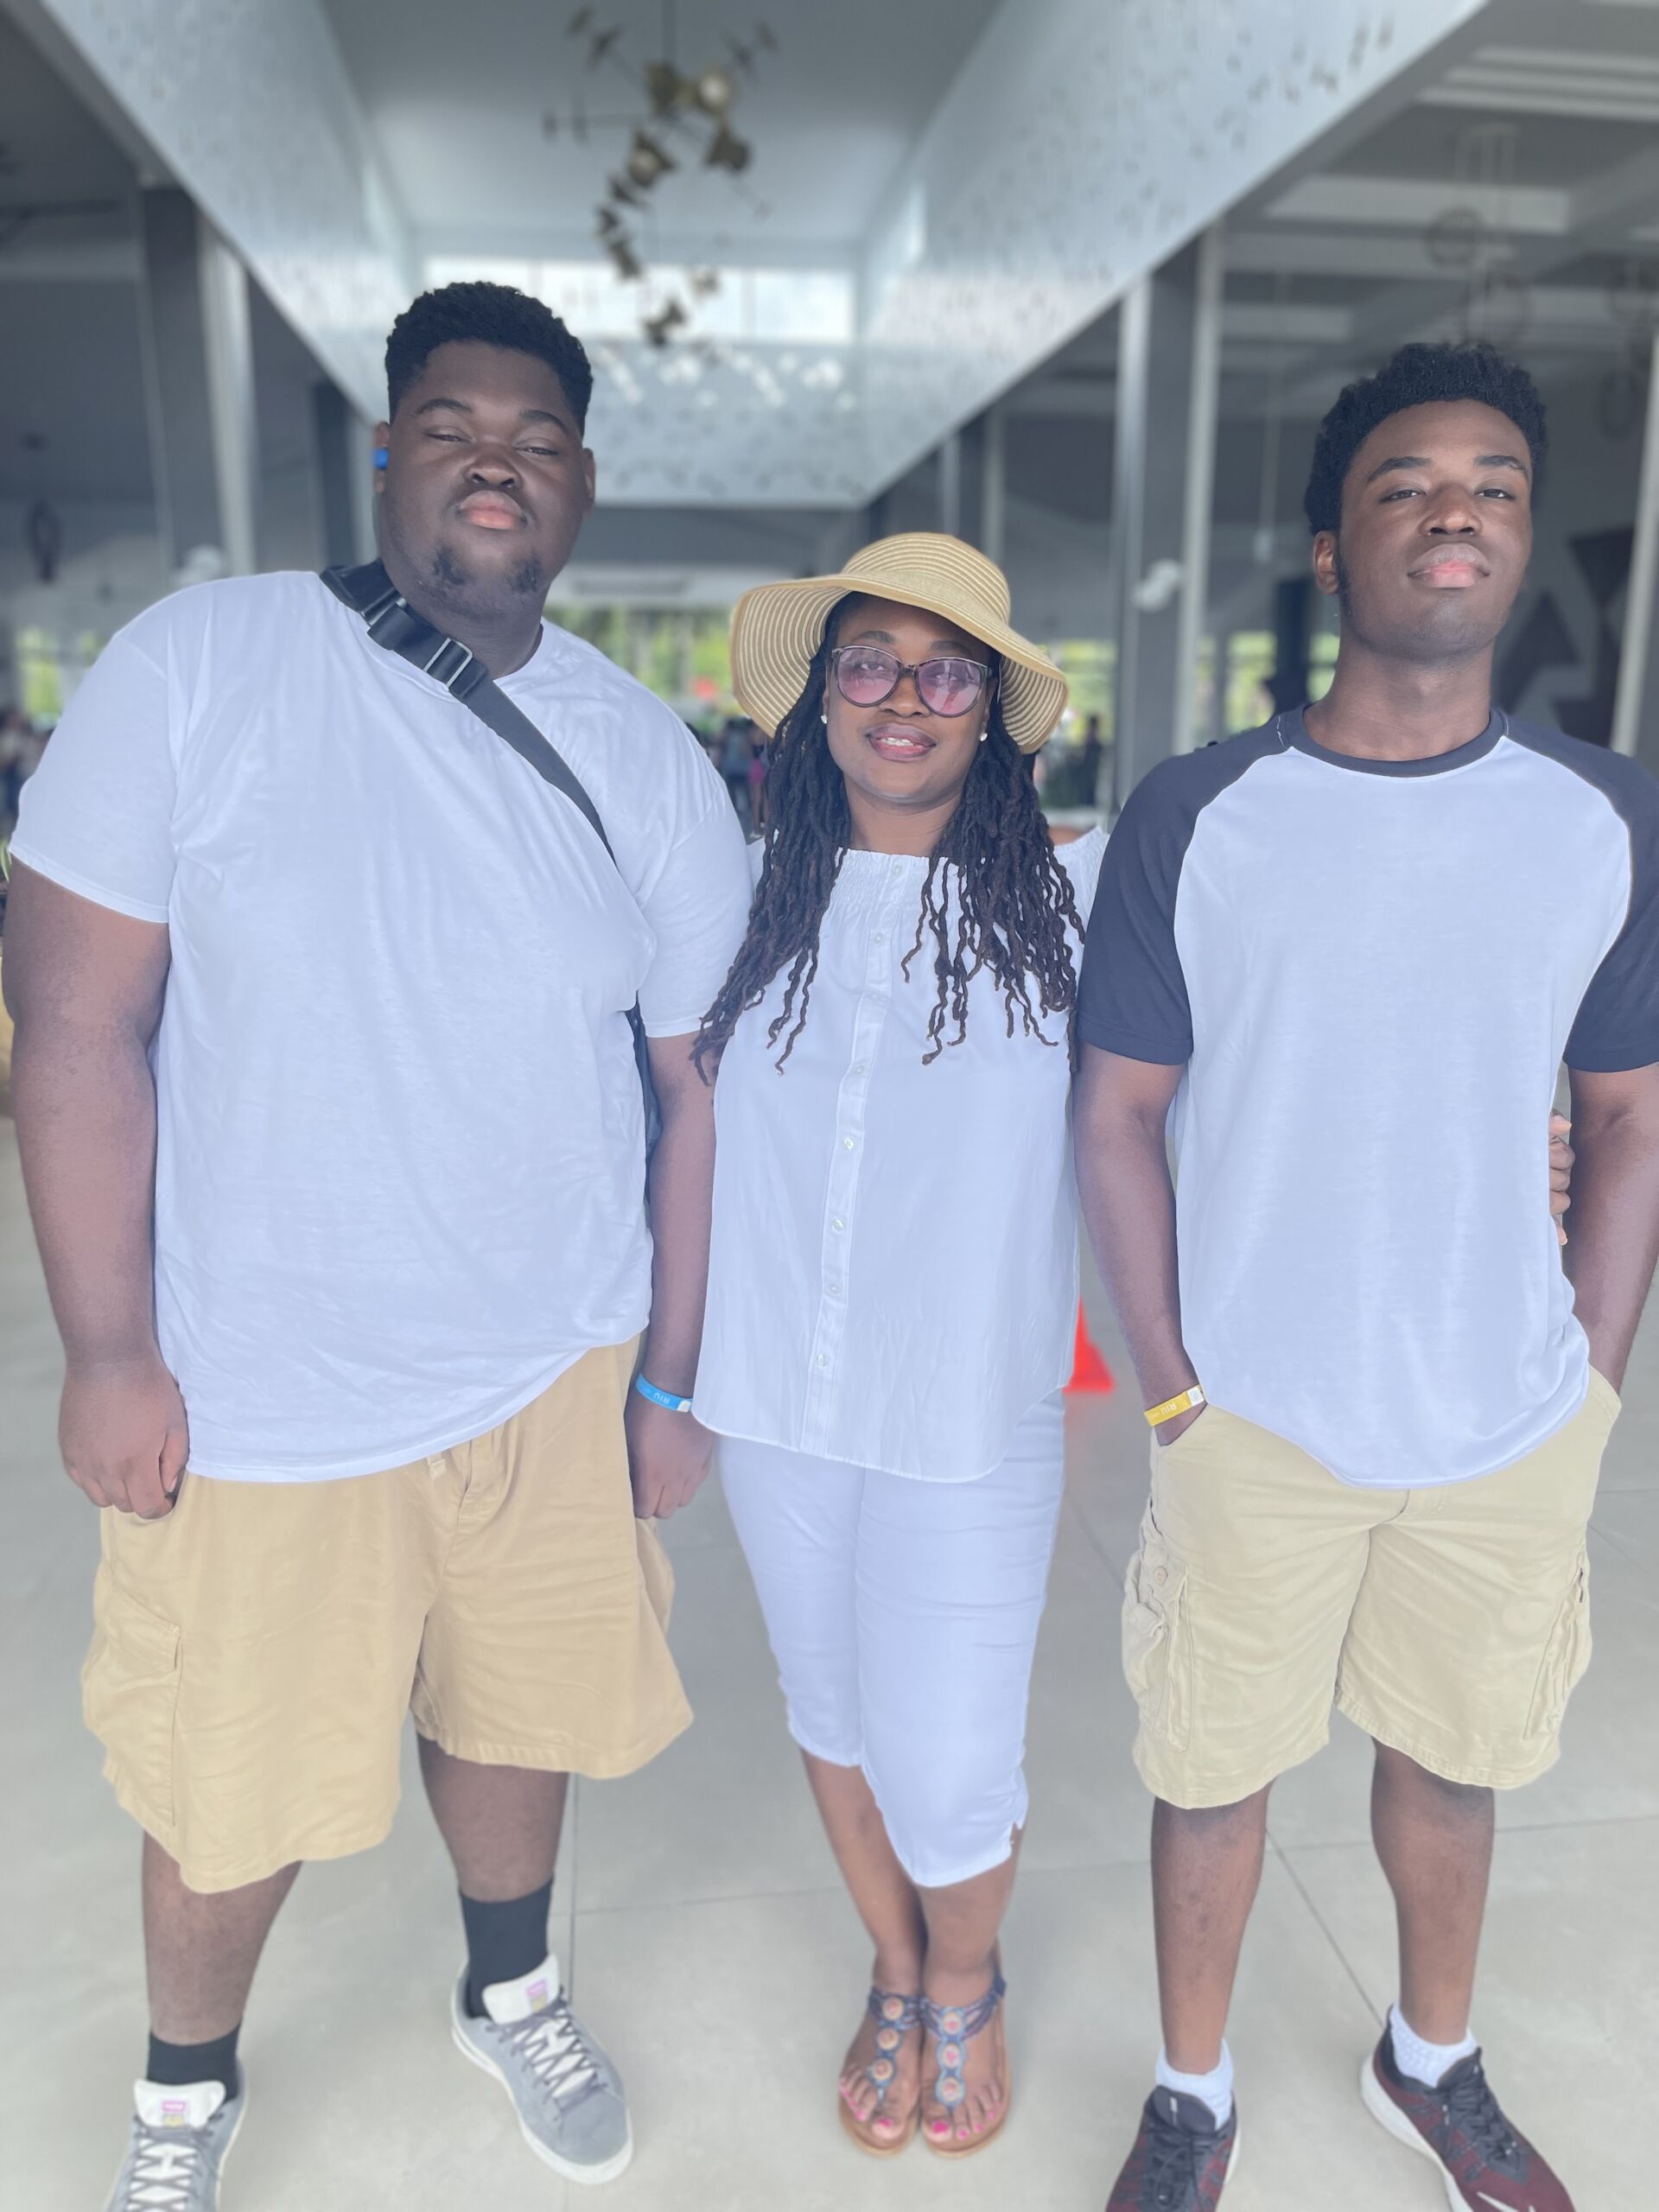 Photo shows Tina Ellis, principal of DRW College Prep, between her two grown up sons. They are all wearing summer clothes and standing in a long non-descript hallway.